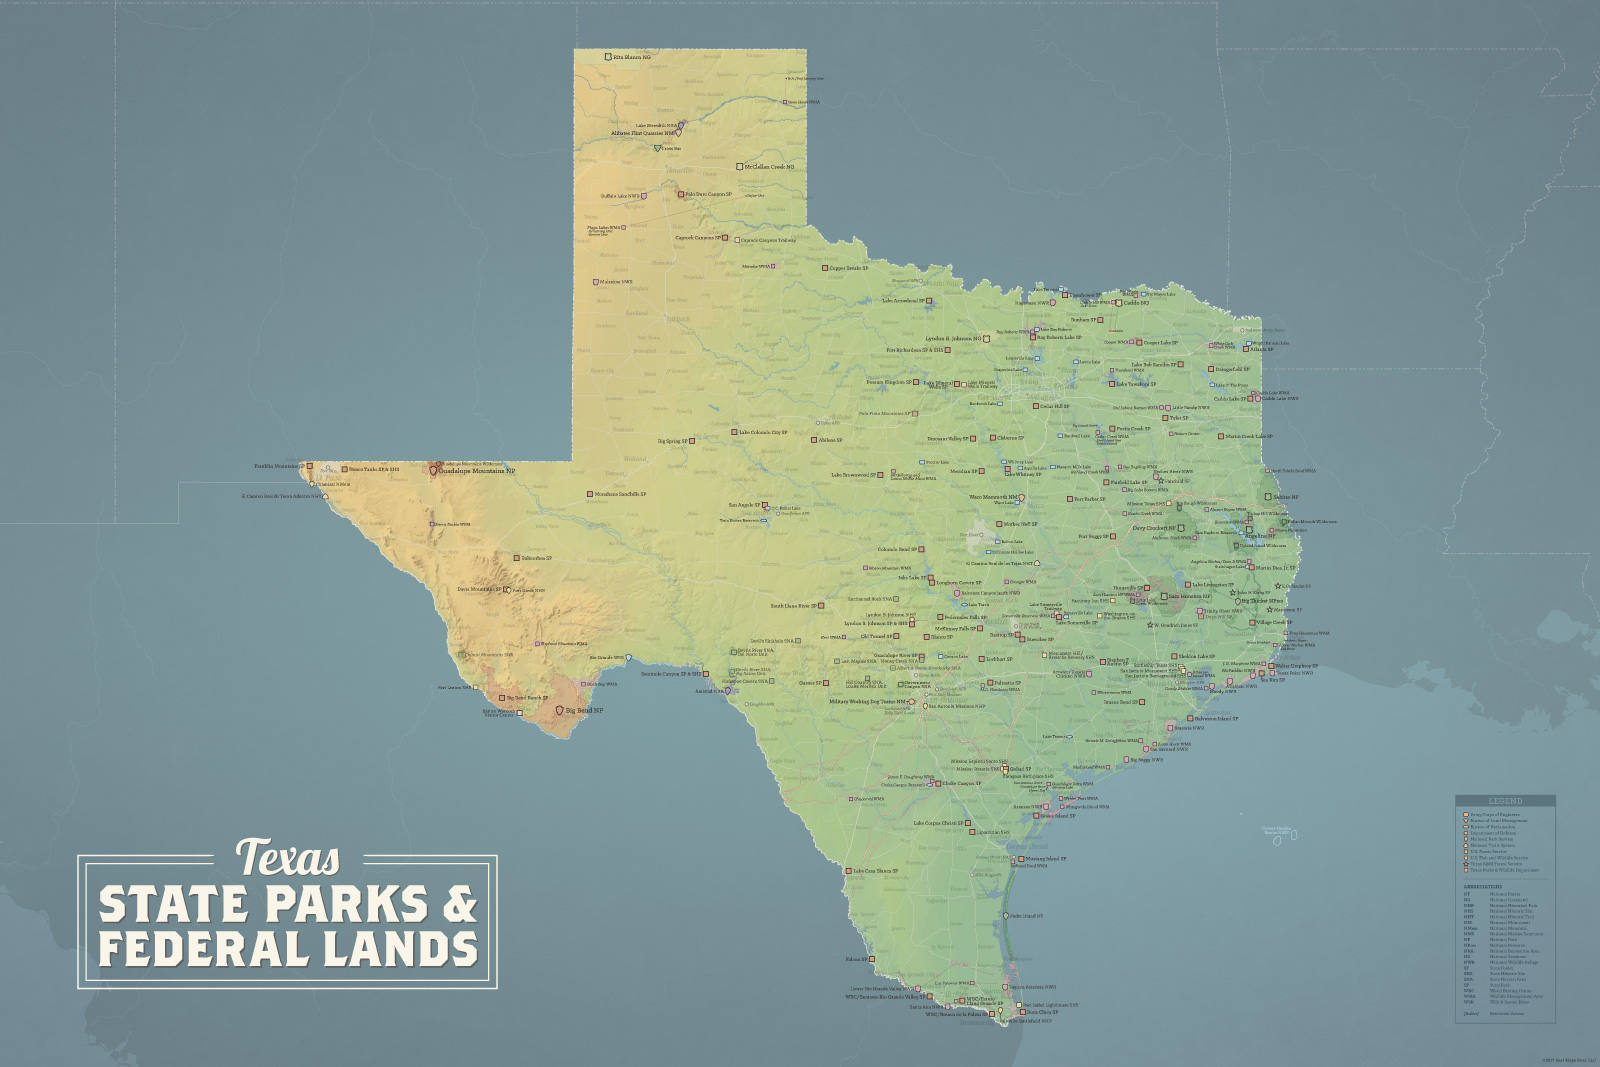 Texas State Parks &amp;amp; Federal Lands Map 24X36 Poster | Etsy - Texas State Parks Map